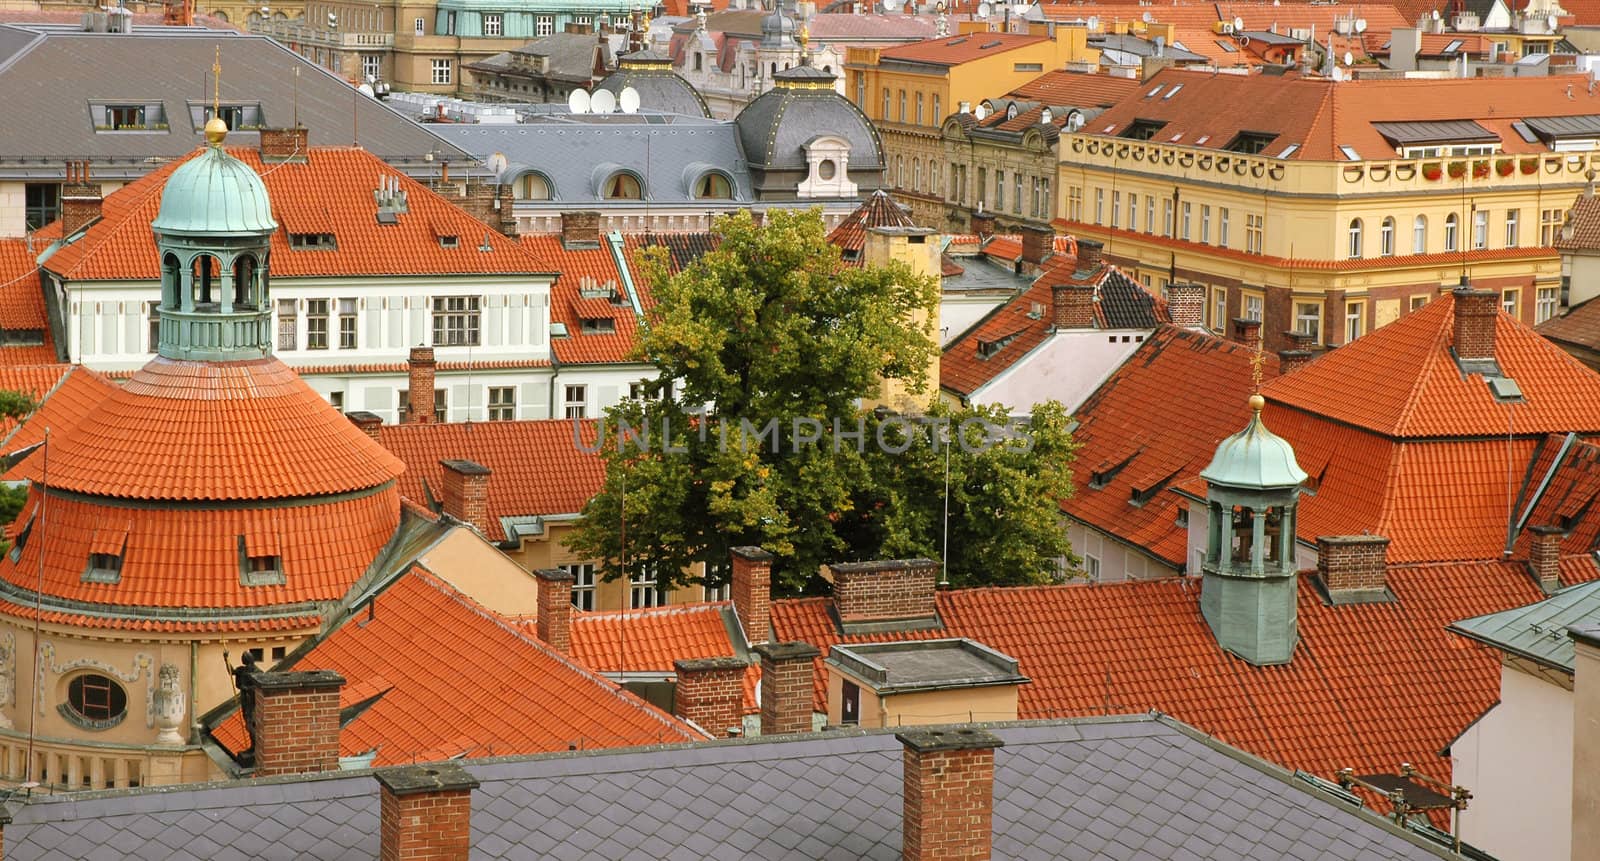 Tree among the roofs in Old Town, Prague, Czech Republic